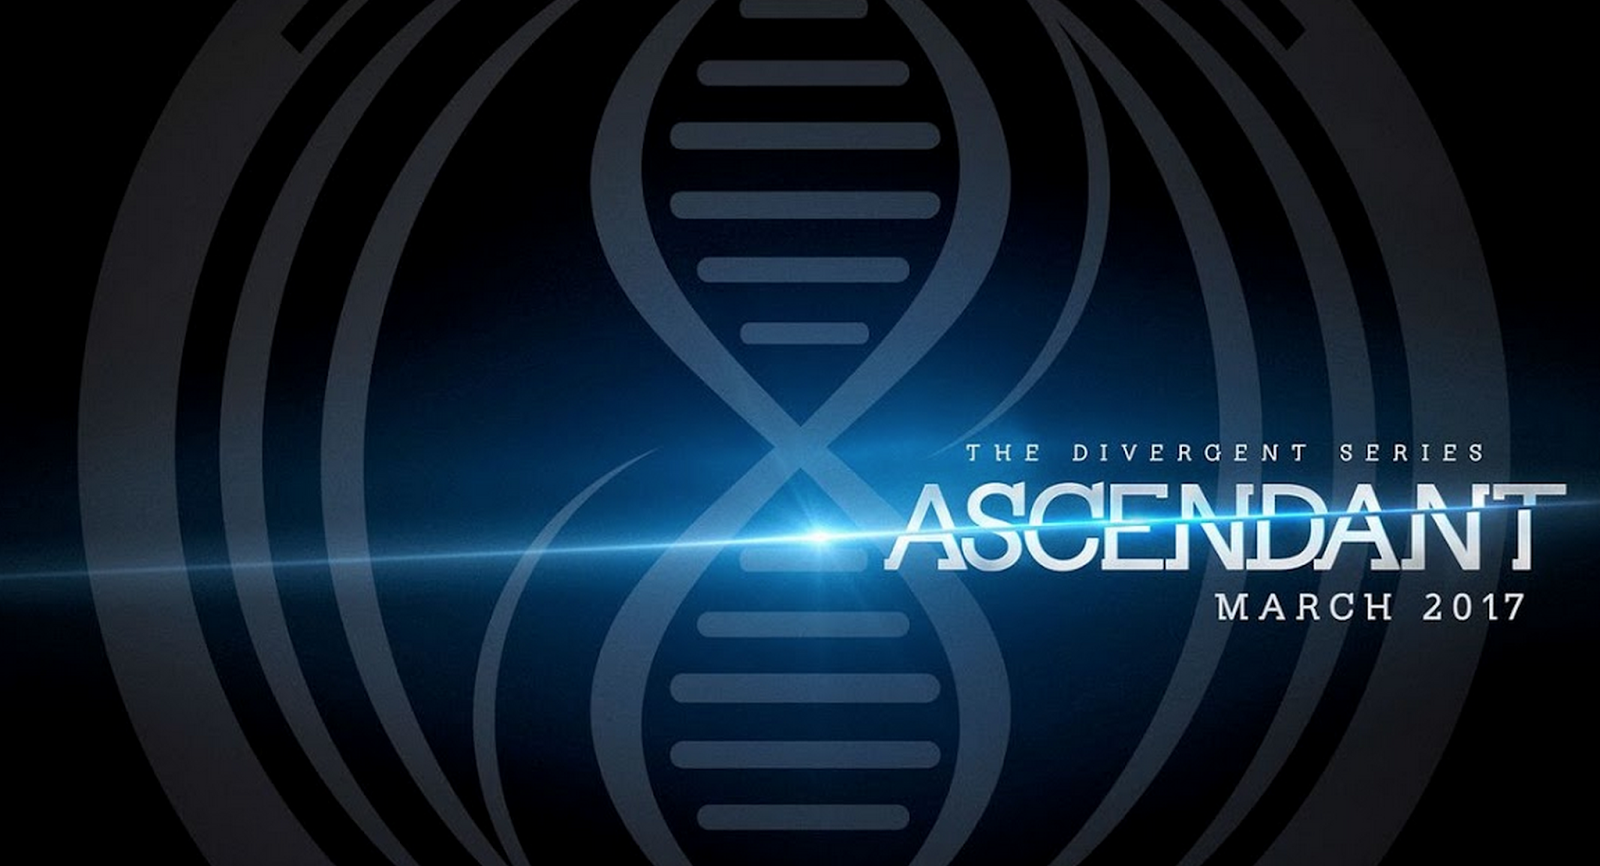 MOVIES: The Divergent Series: Ascendant - News Roundup *Updated 24th December 2018*